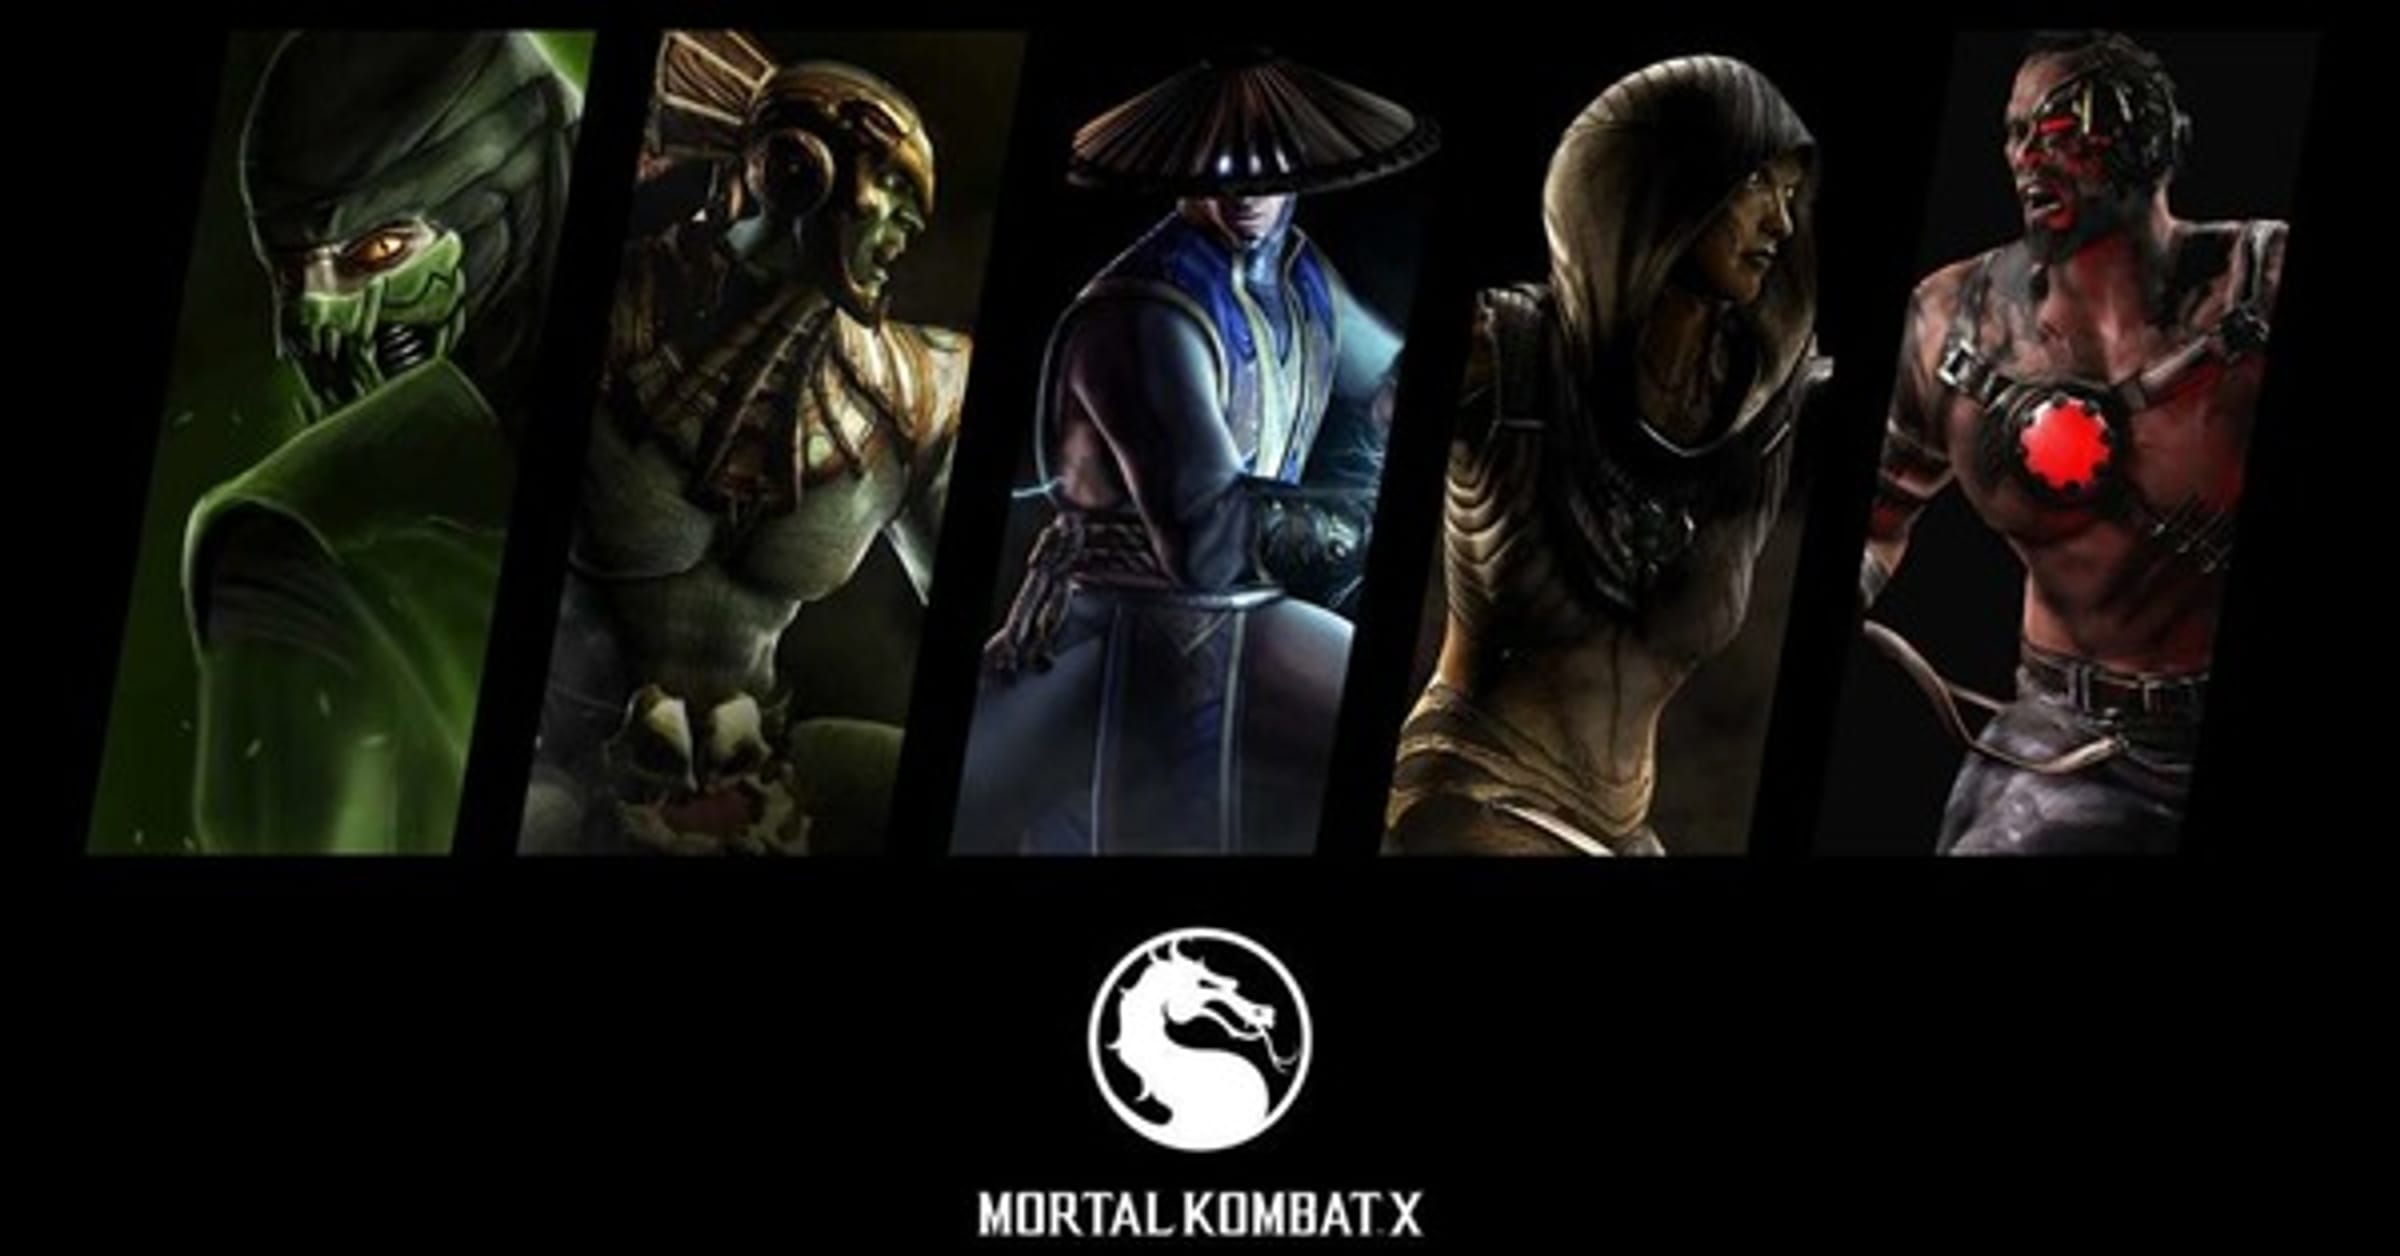 Mortal Kombat X to have strong female characters